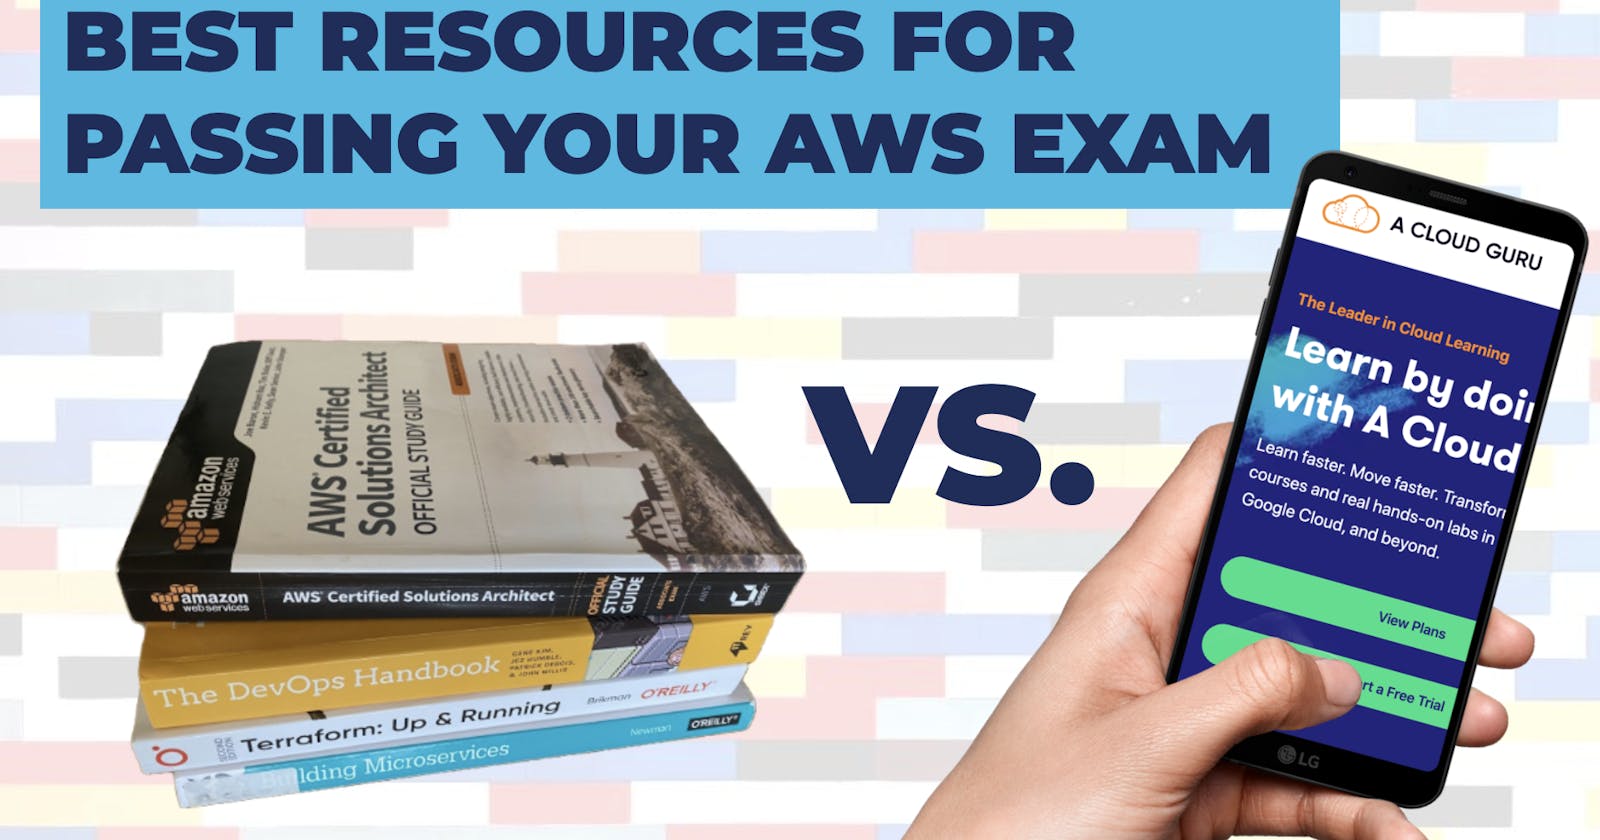 Best Resources For AWS Certifications: An Extensive & Opinionated Guide (So You Pass The First Time!)